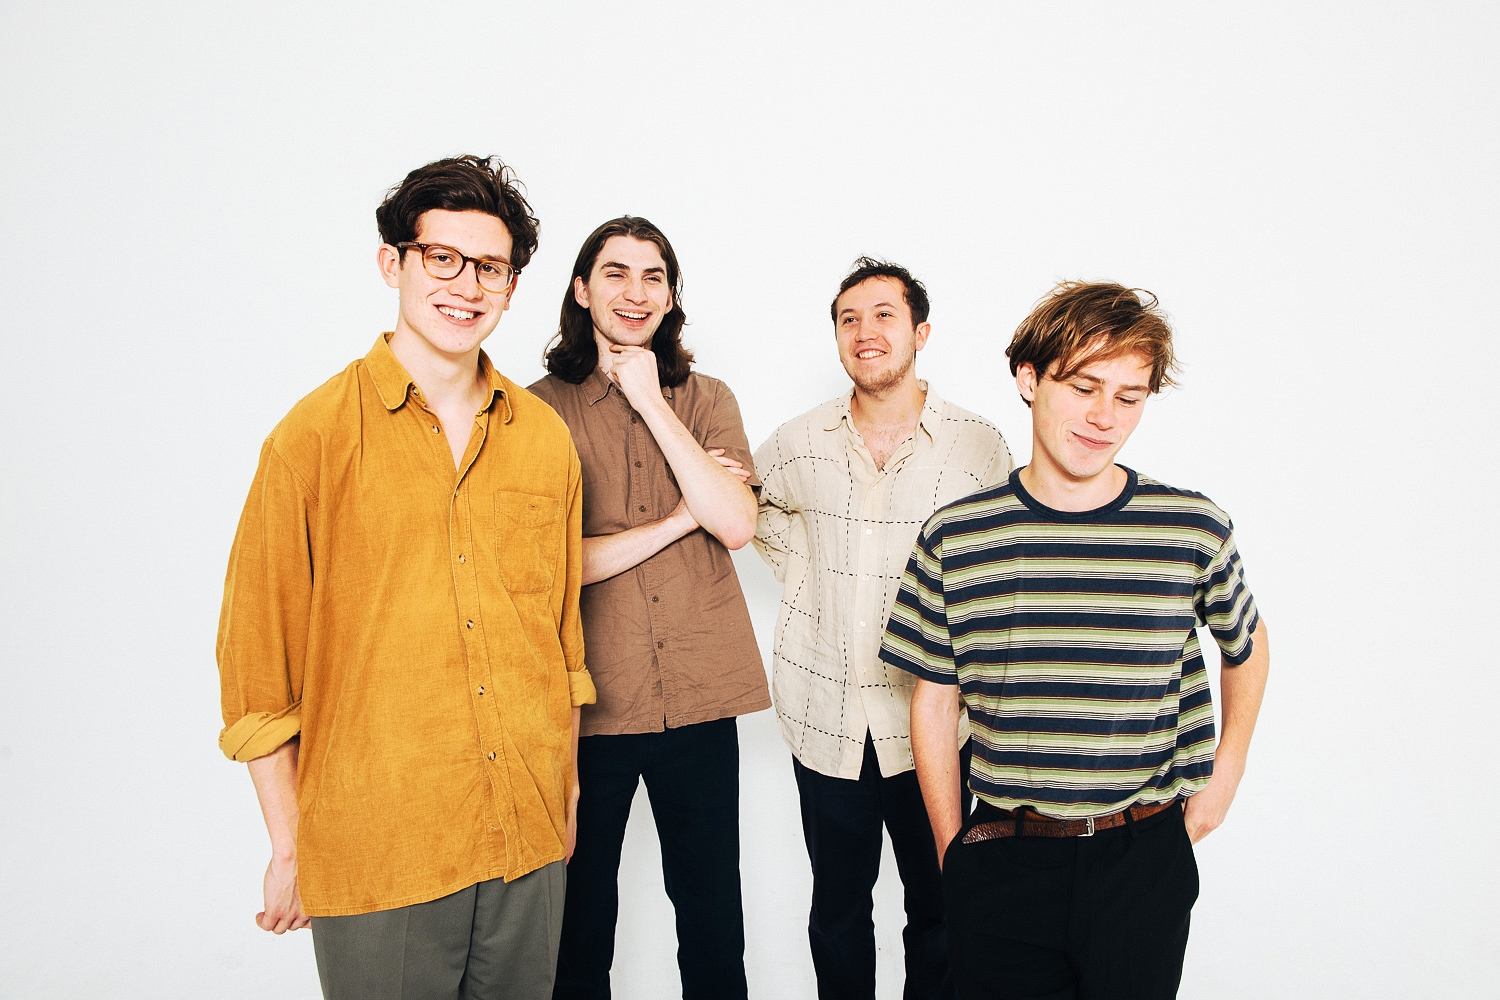 Stream the new EP from The Magic Gang right now!